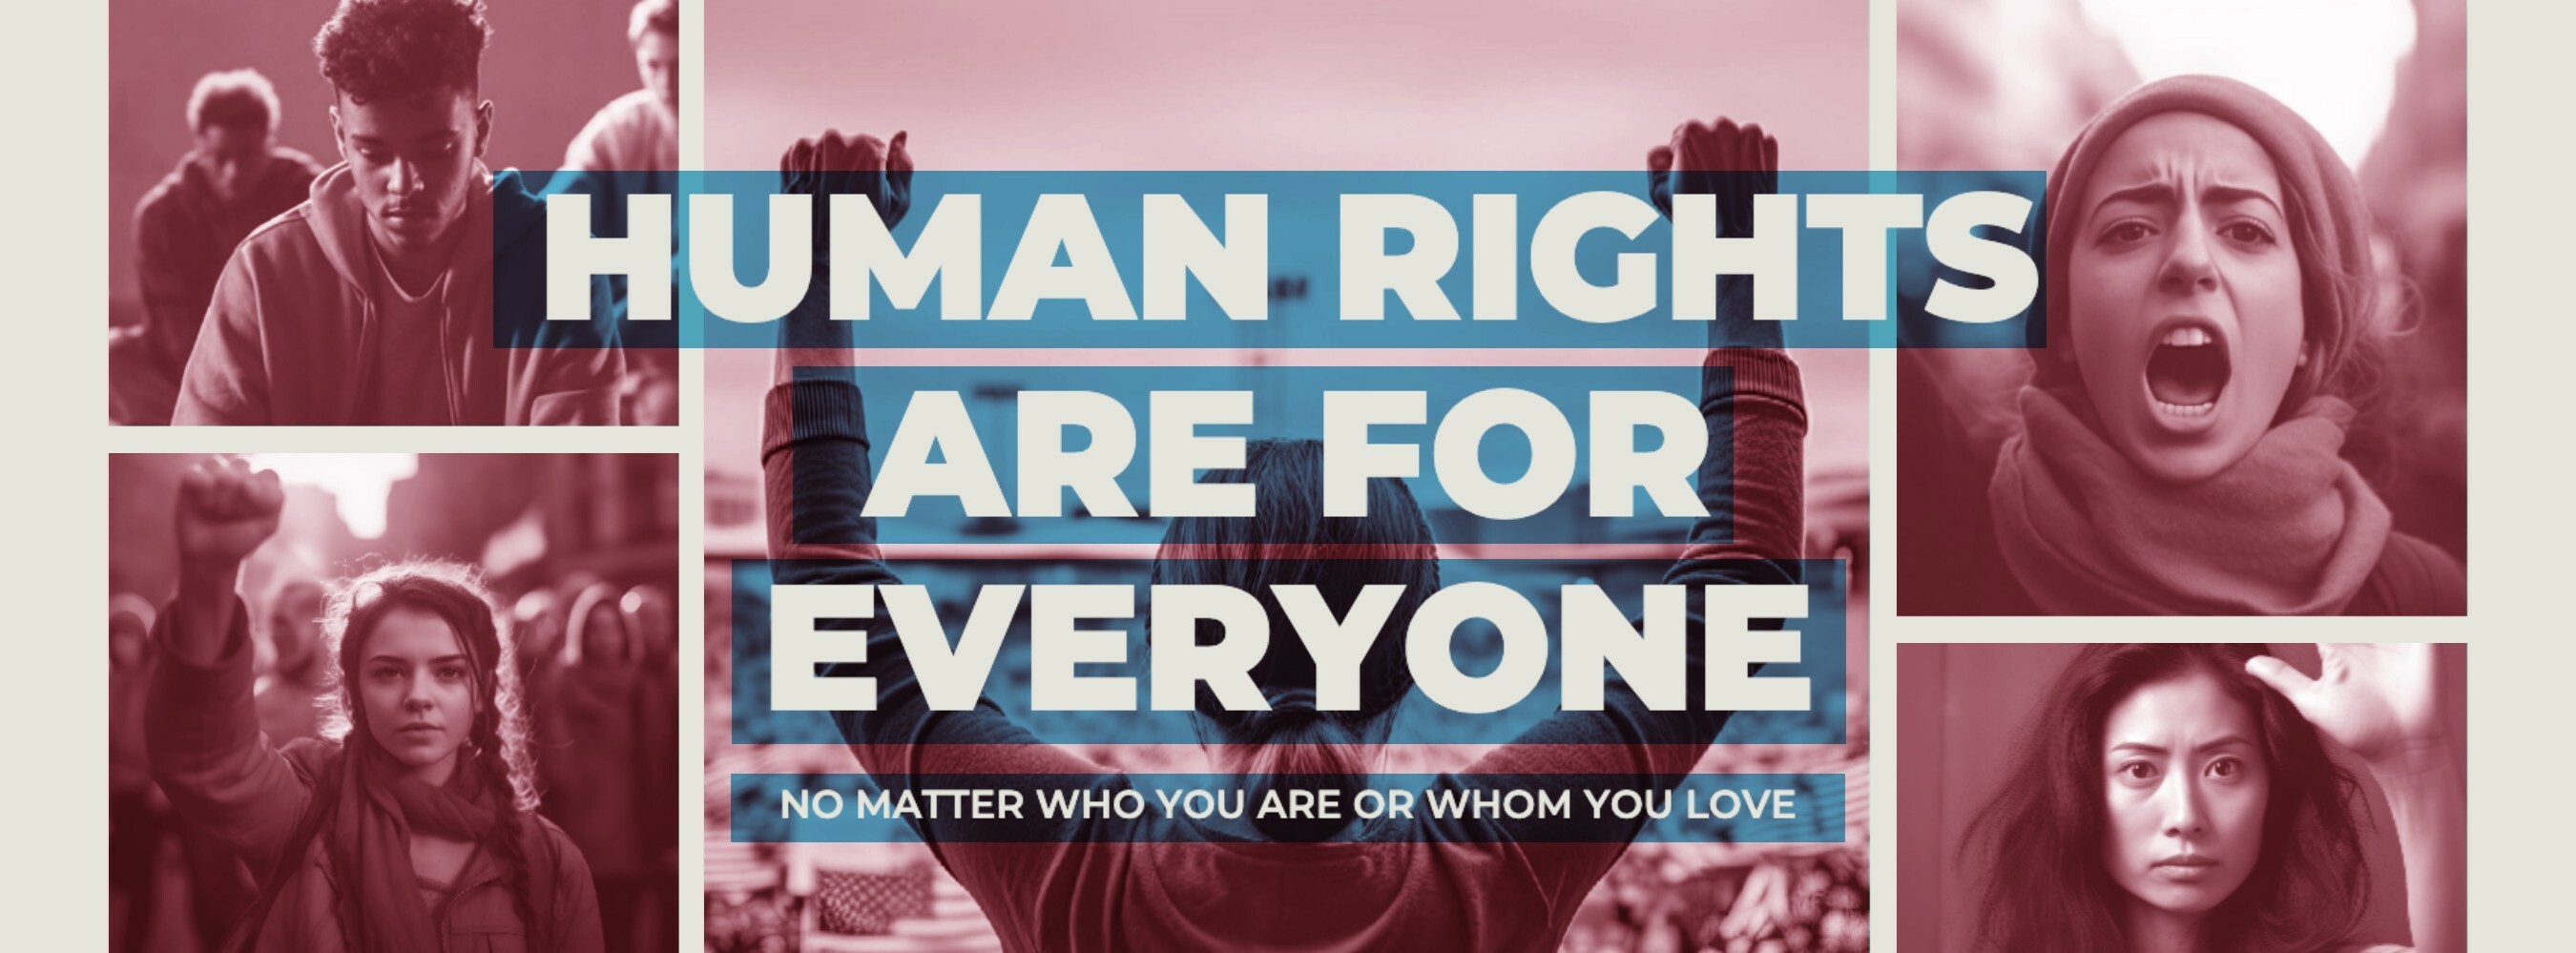 Human Rights Facebook Cover Template